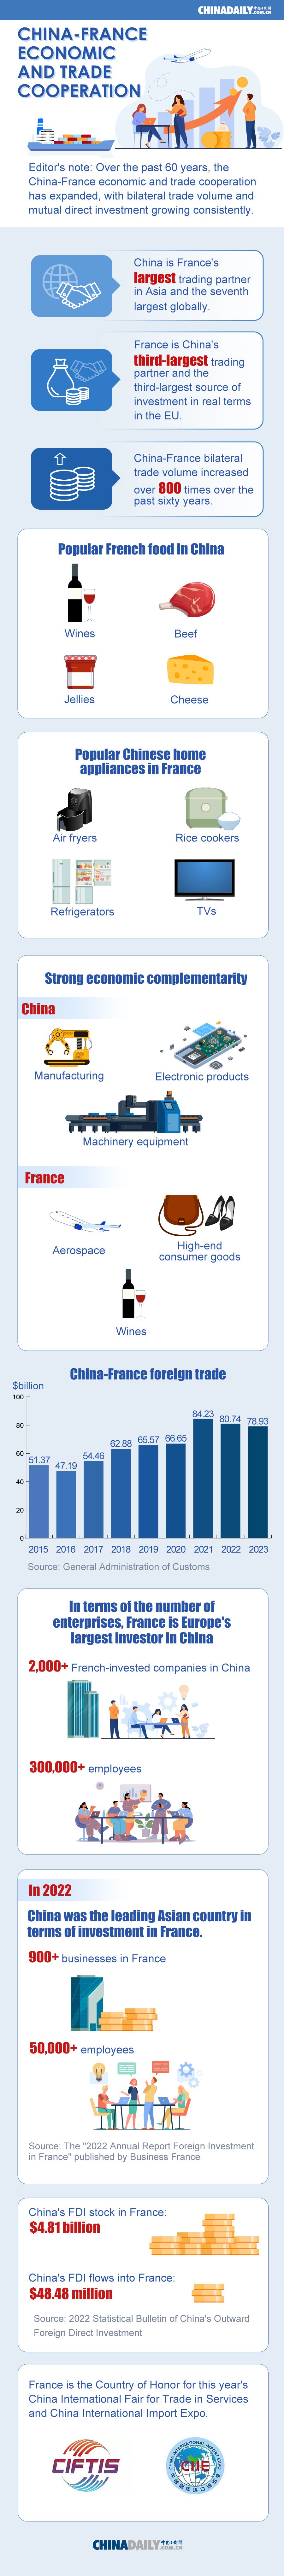 China-France economic and trade cooperation